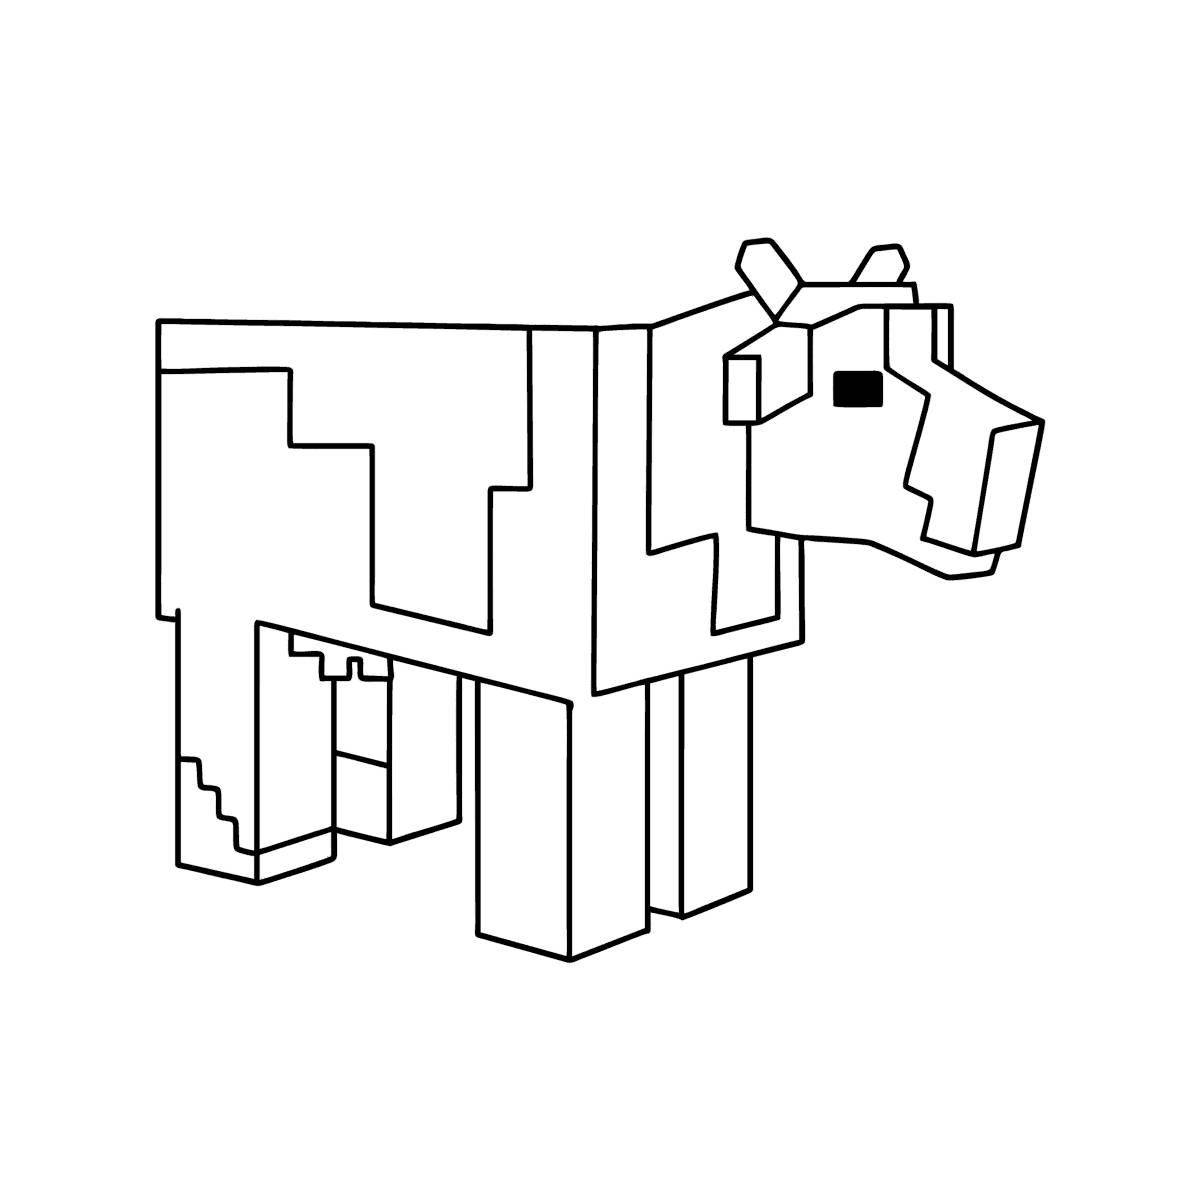 Sparkly minecraft dog coloring page